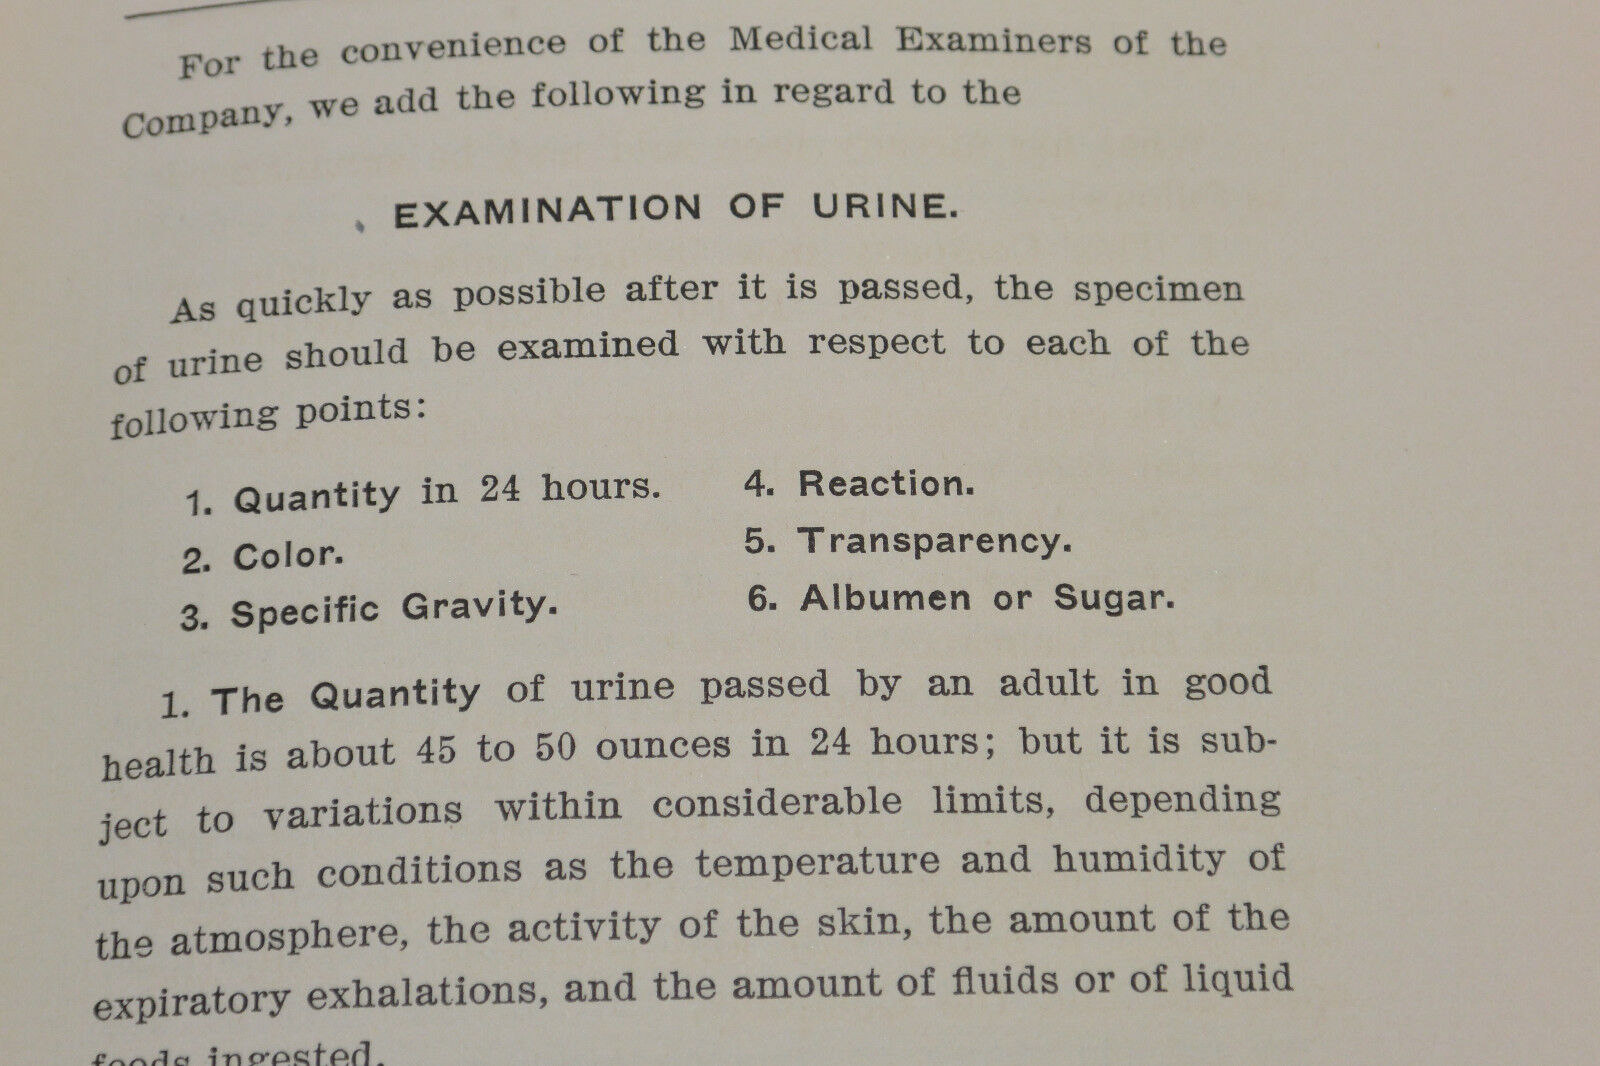 VINTAGE 1902 'INSTRUCTIONS TO THE MEDICAL EXAMINERS OF THE NEW YORK LIFE' BOOK